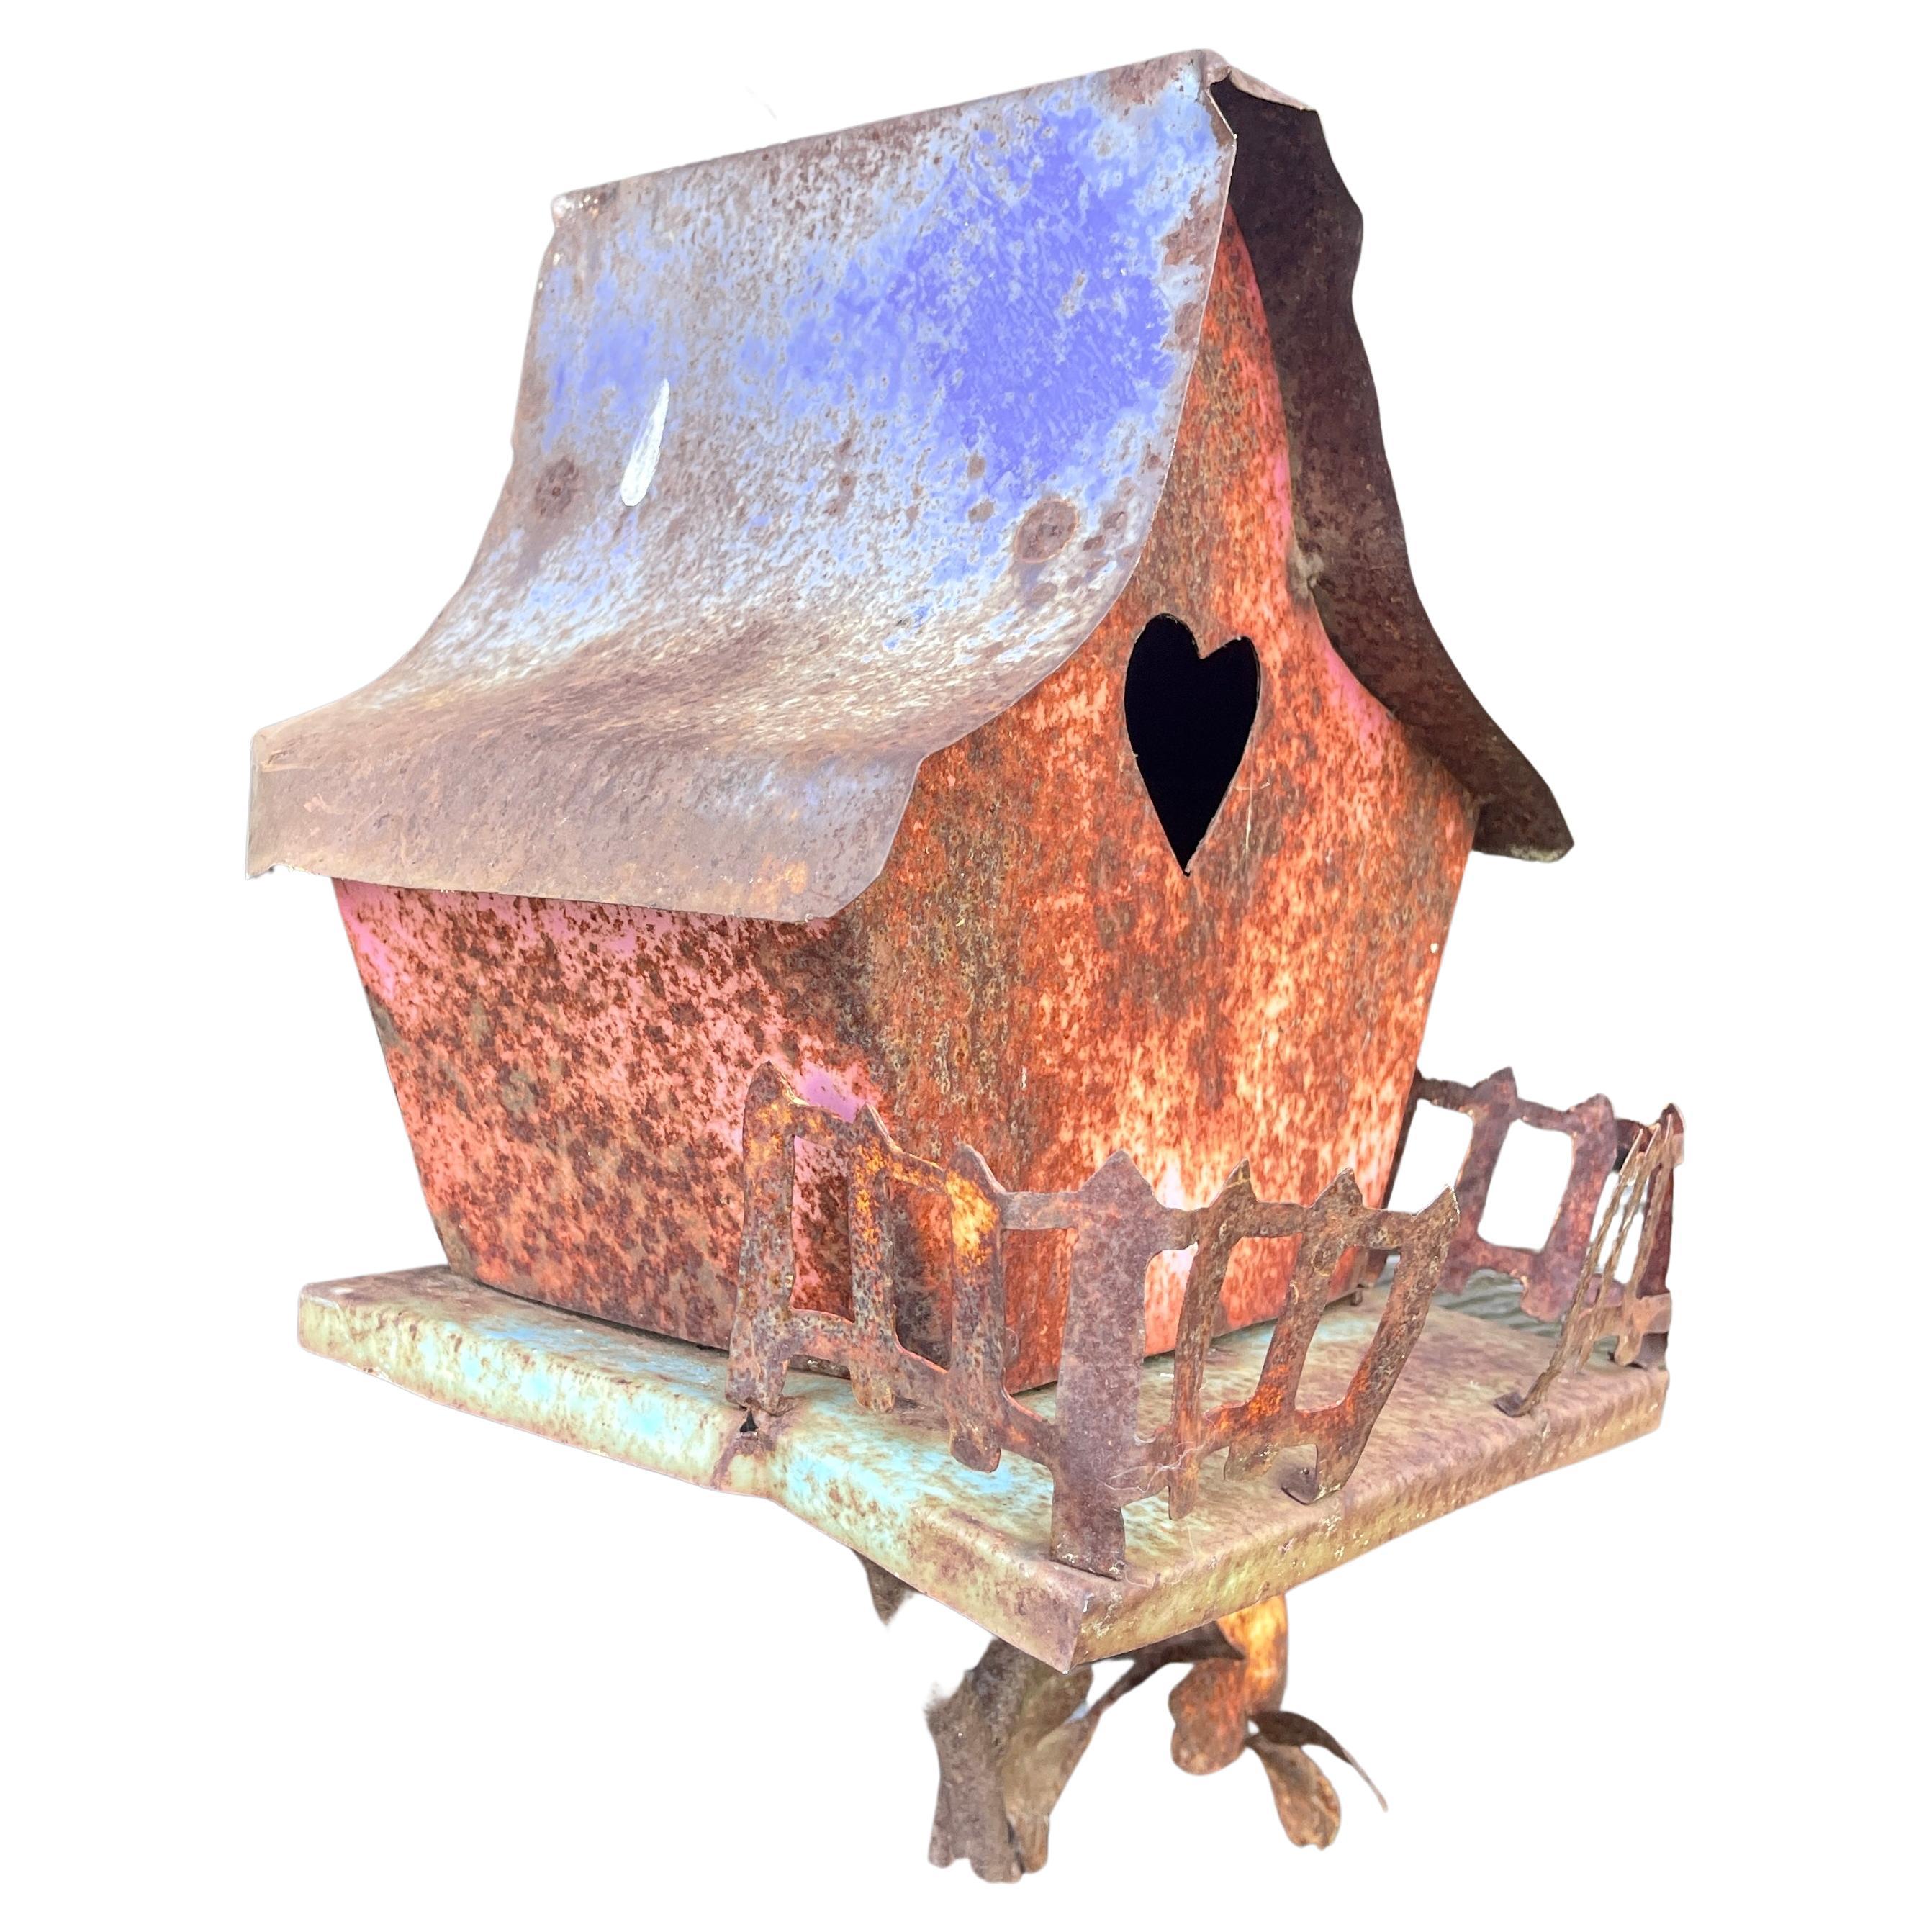 Charming One of a Kind Iron Bird House Feeding With a Heart as Window.
The bird feeder is in its original paint and patina. The house has a rear door in working condition, that functions as access to the house for the bird seeds.